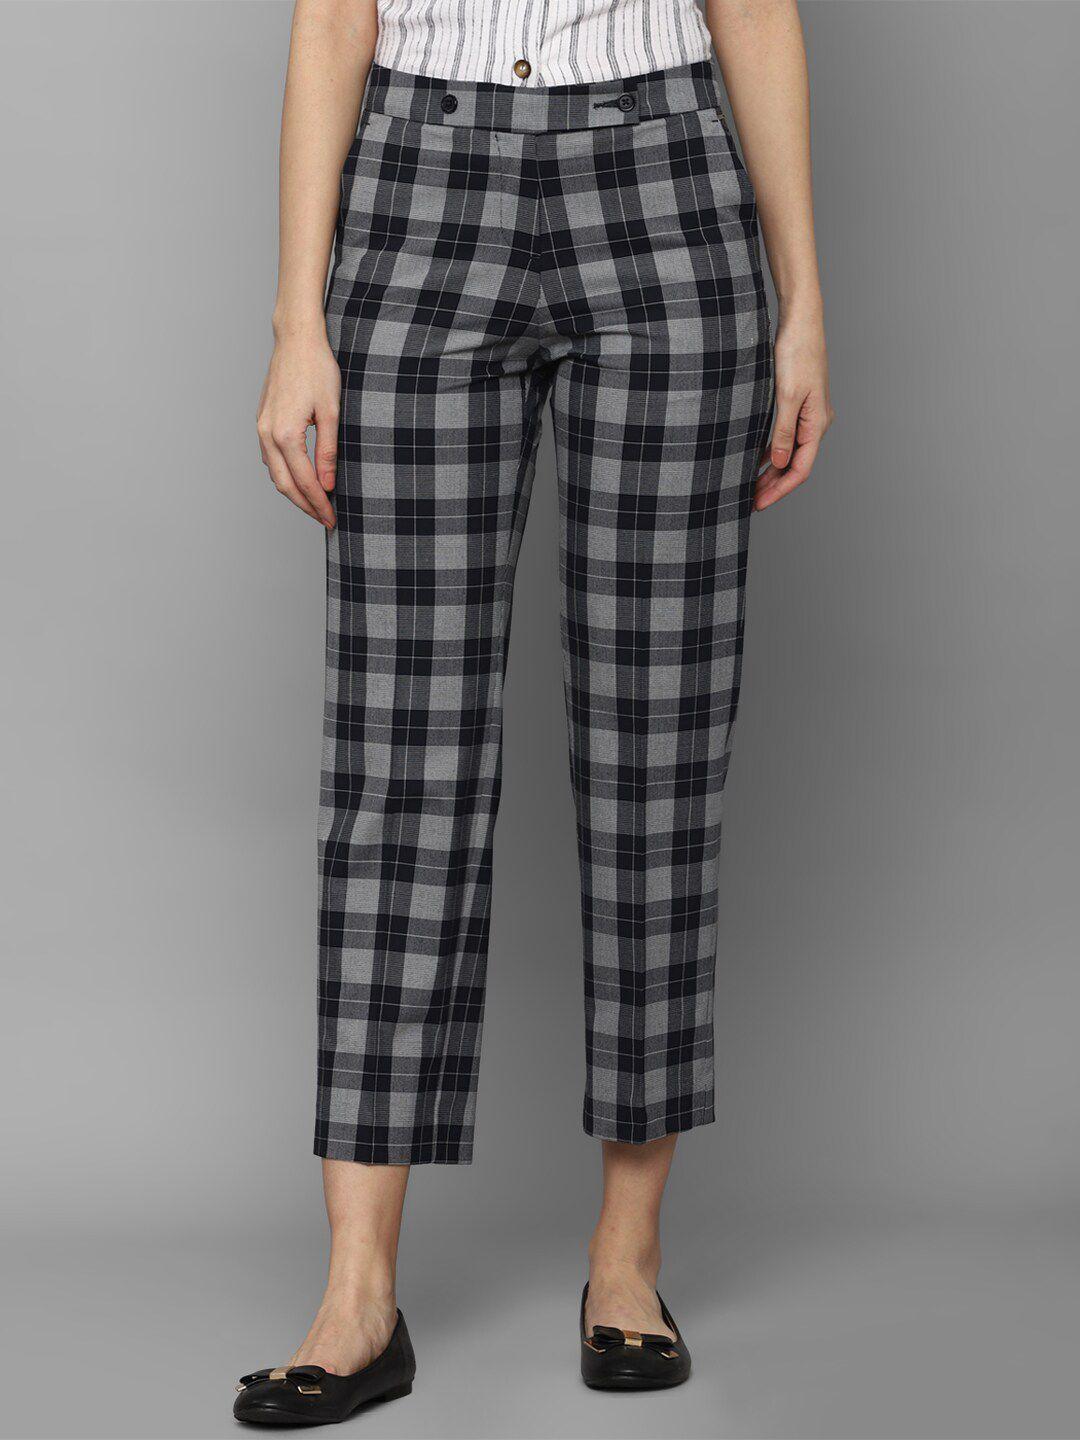 allen solly woman women black checked regular fit trousers